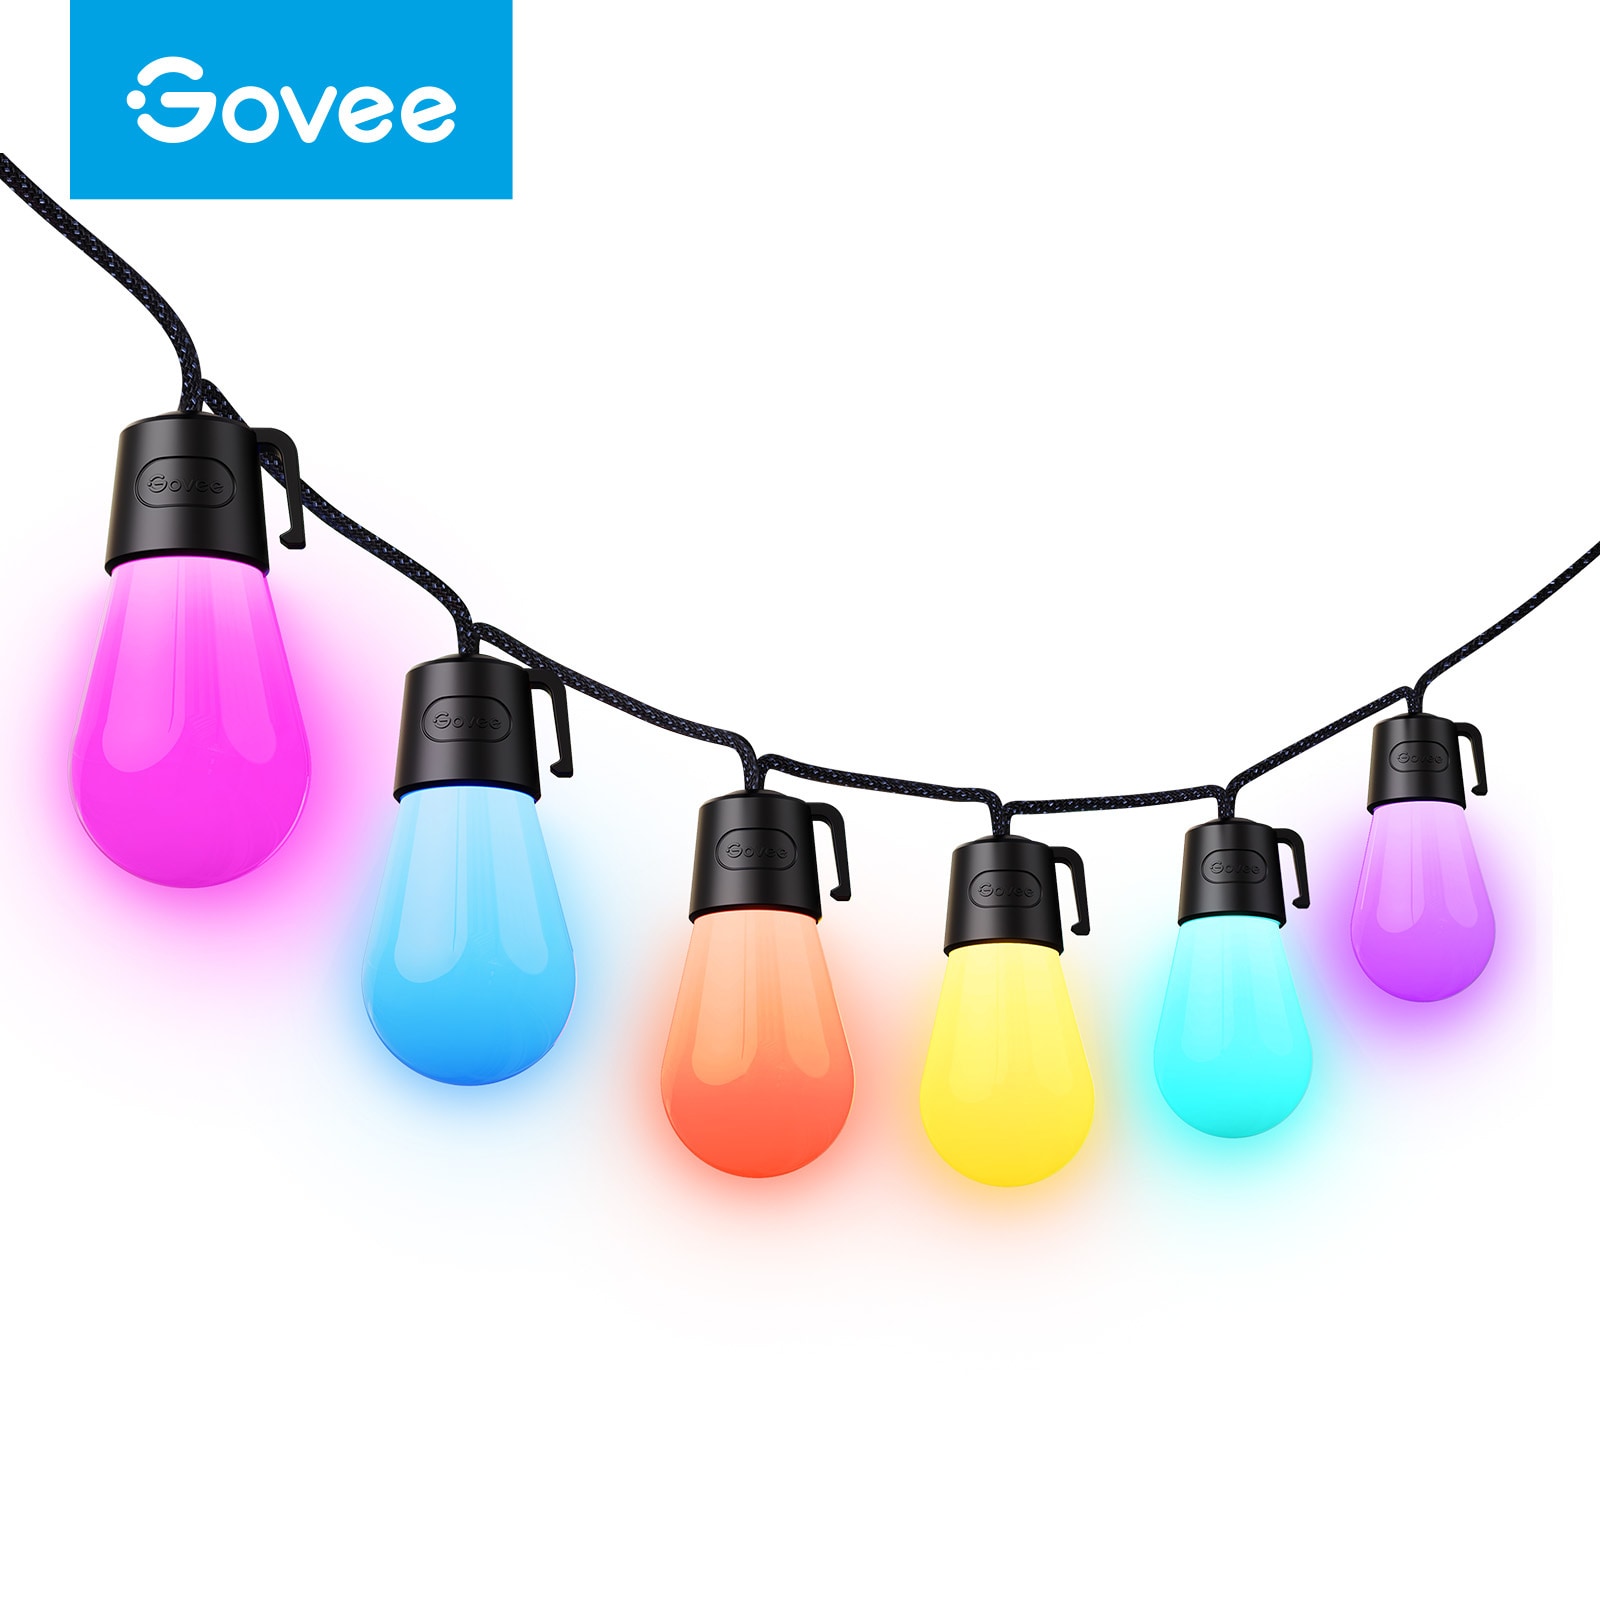 Govee 48-ft Multicolor String Light with 15 Changing-Light LED Edison Bulbs Bluetooth Compatibility Wi-fi Compatibility the String Lights department at Lowes.com